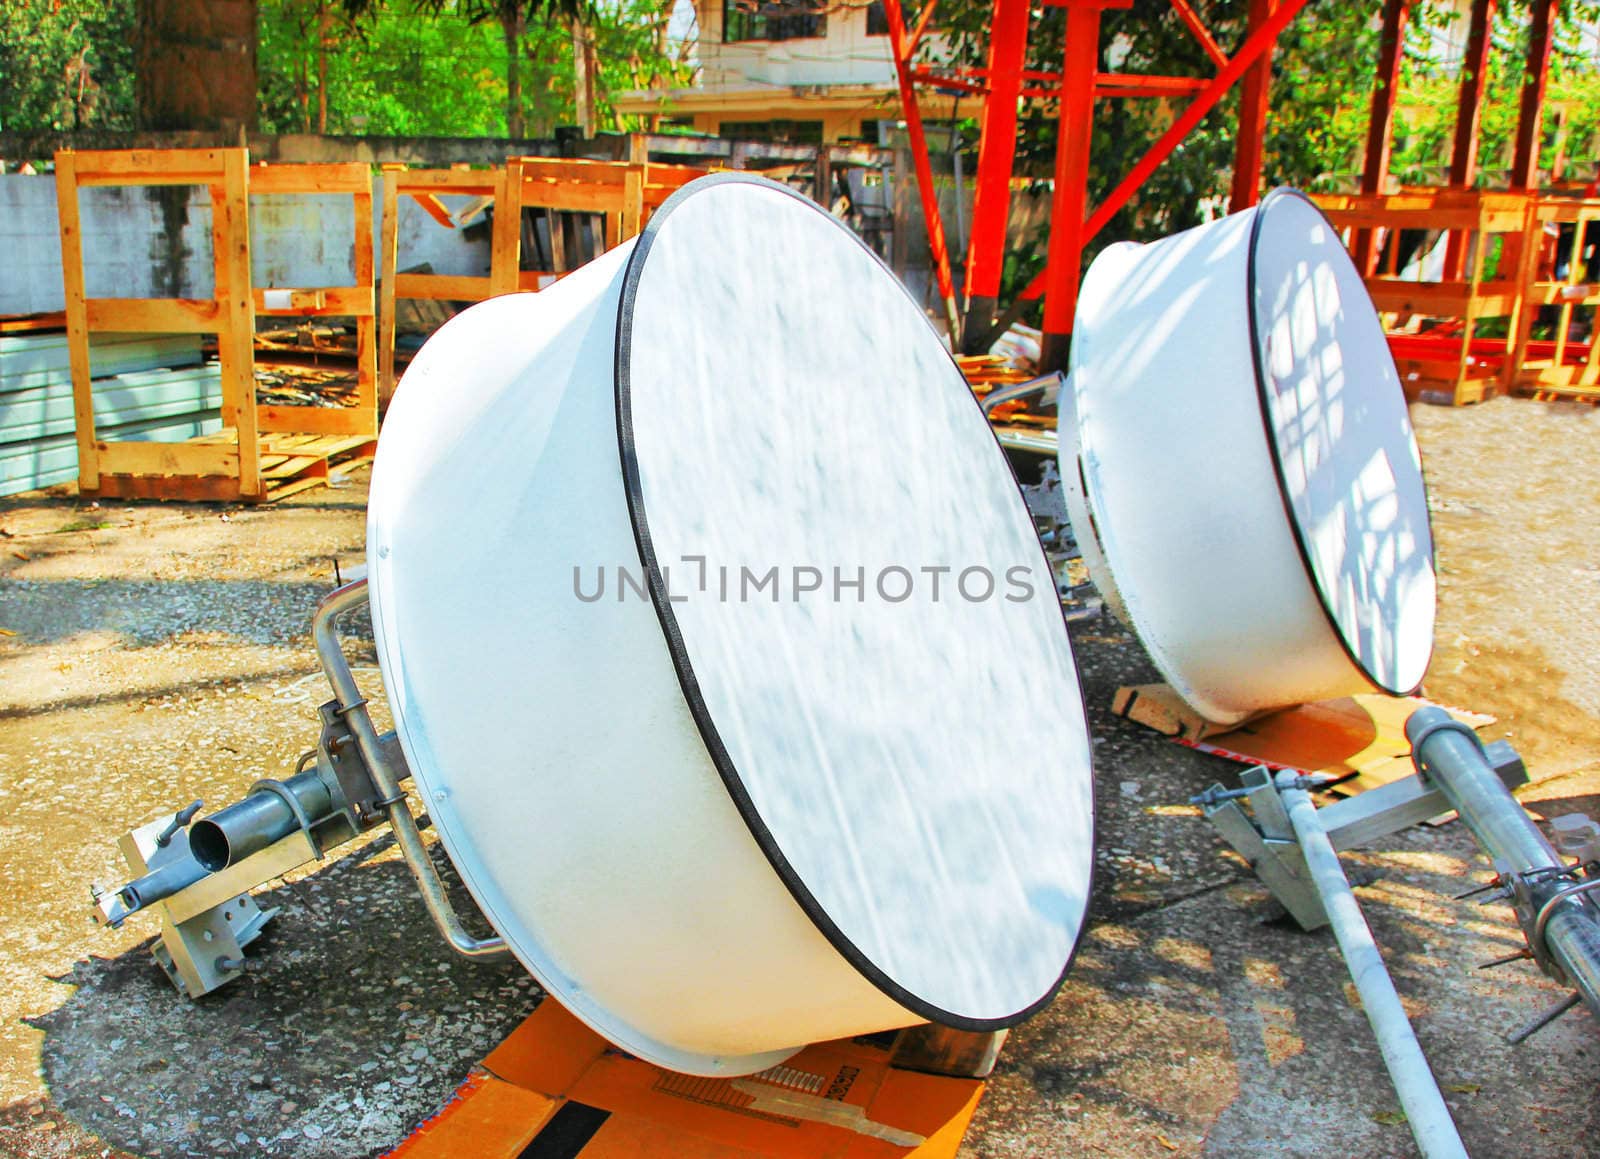 Equipment in preparation for the satellite dishes placed on the floor